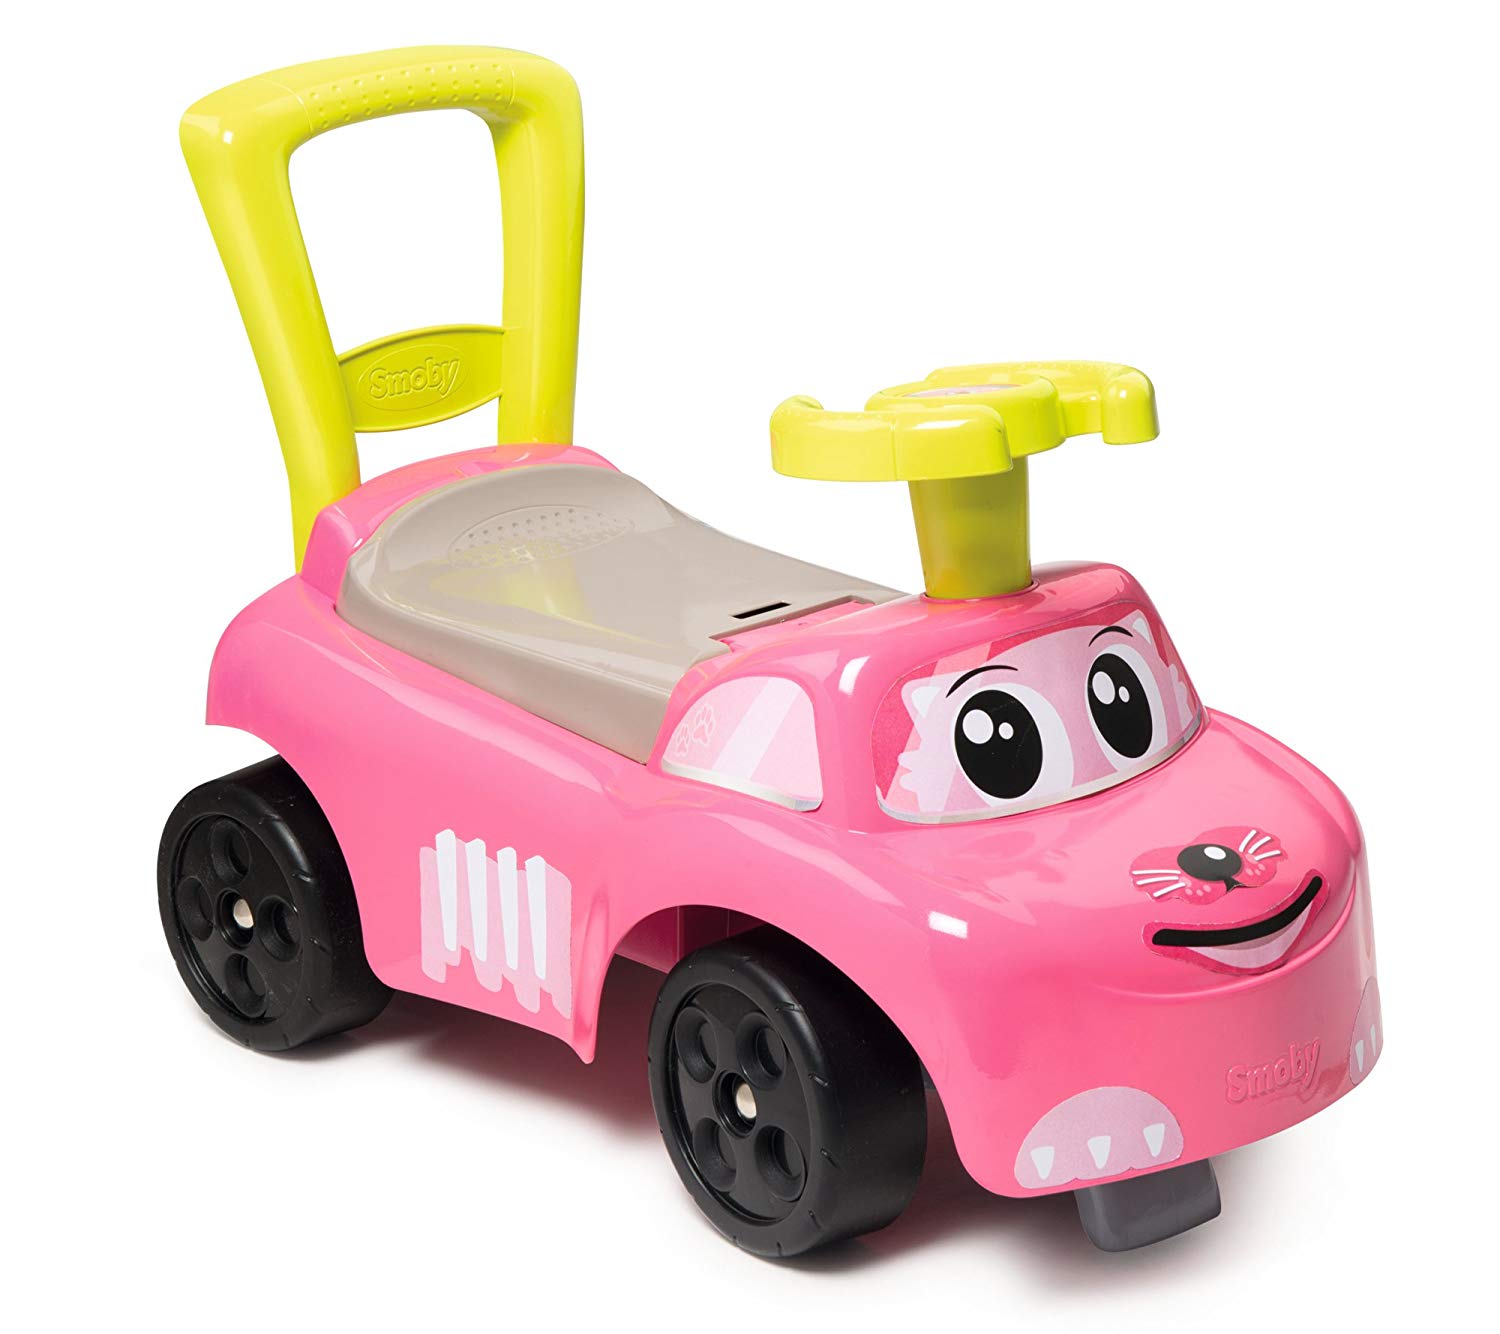 Smoby 720518 My First Car Ride-On Toy – Pink